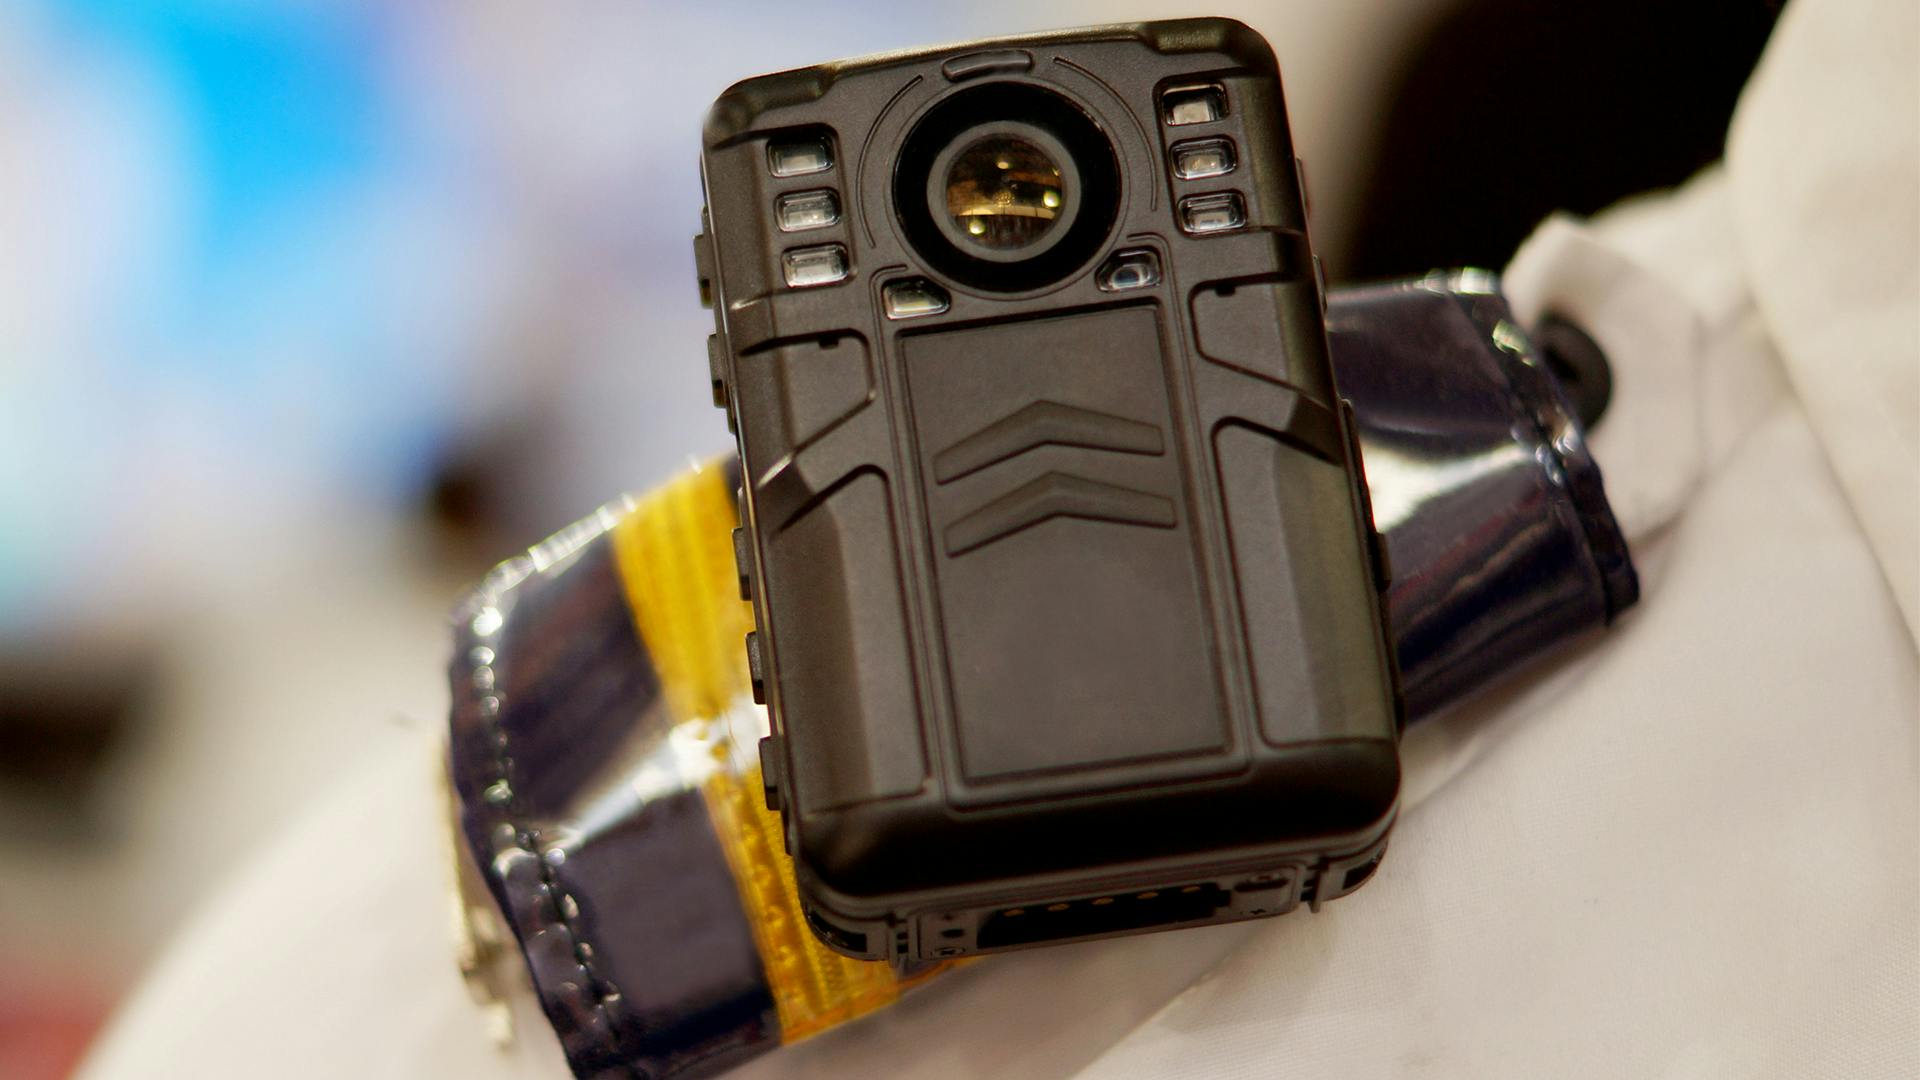 body worn camera to capture photos and video during law and order situations